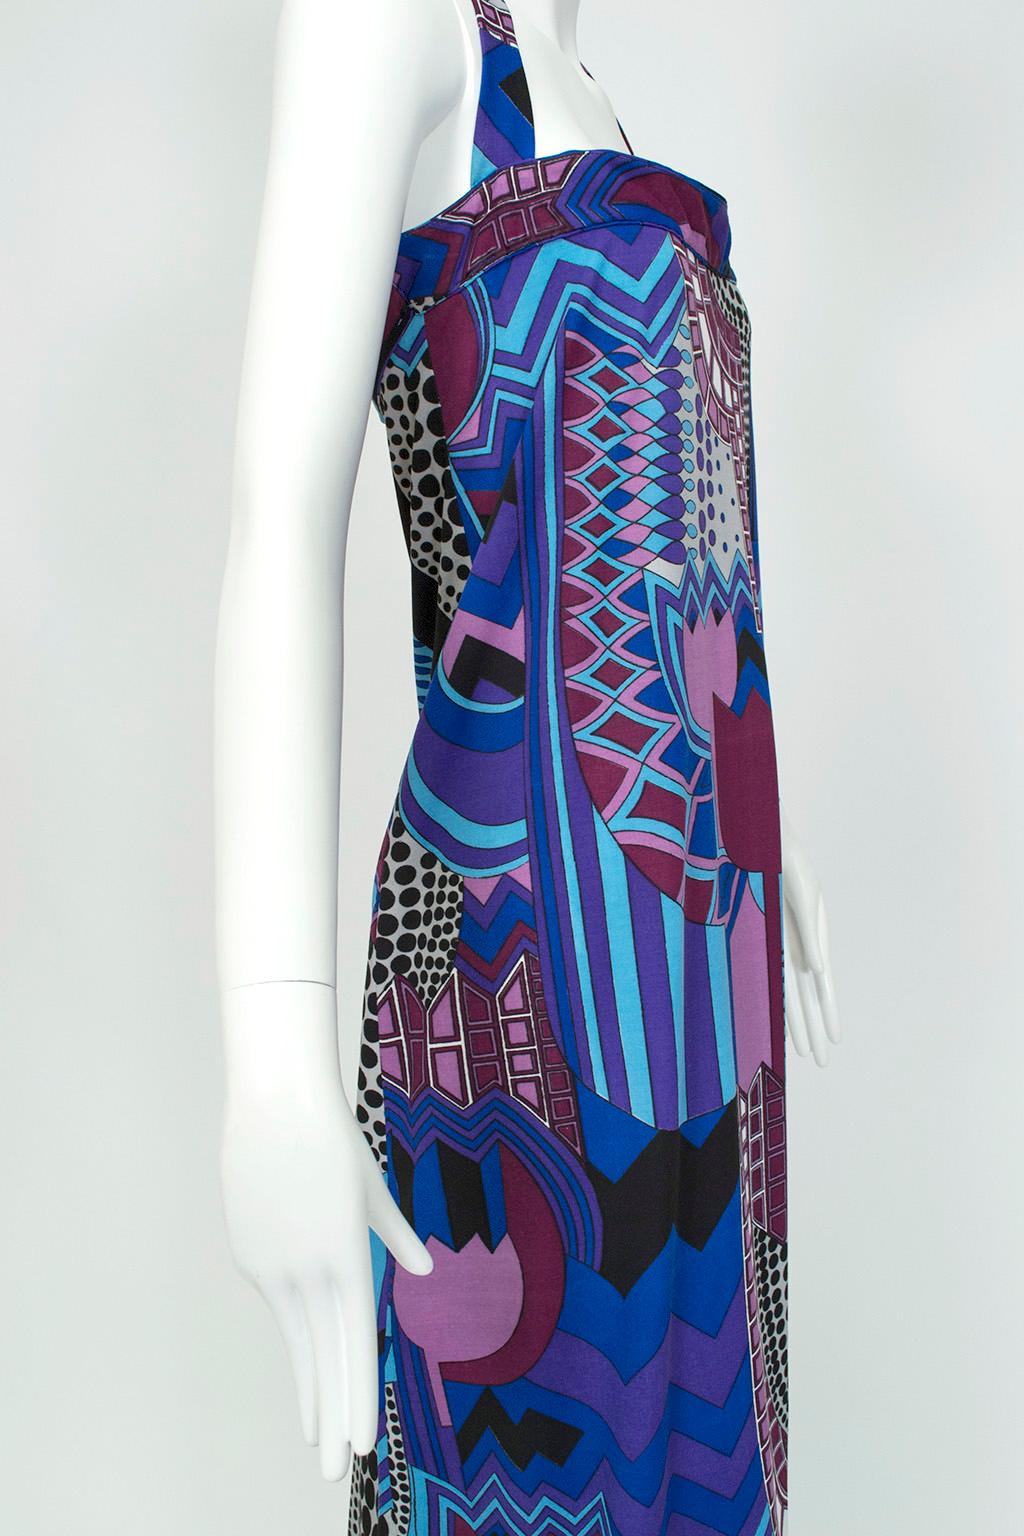 Women's Signed Colin Glascoe Blue Abstract Stained Glass Midi Halter Dress - M, 1970s For Sale